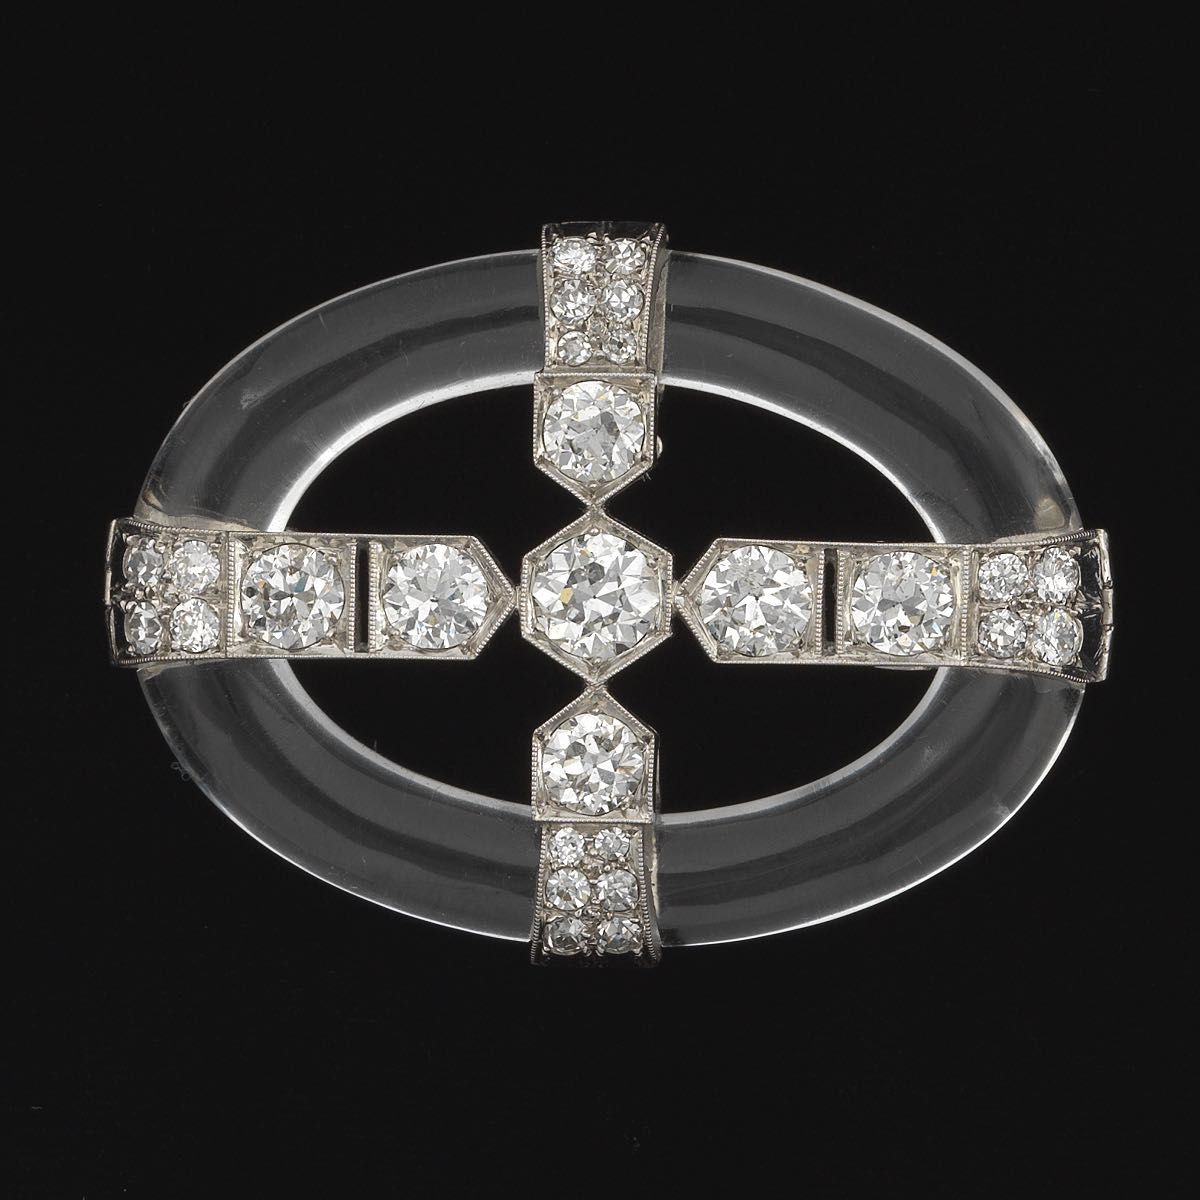 Diamond, Platinum and Rock Crystal Brooch  1-3/4 x 1-1/8 in. Oval shape brooch comprised of carved